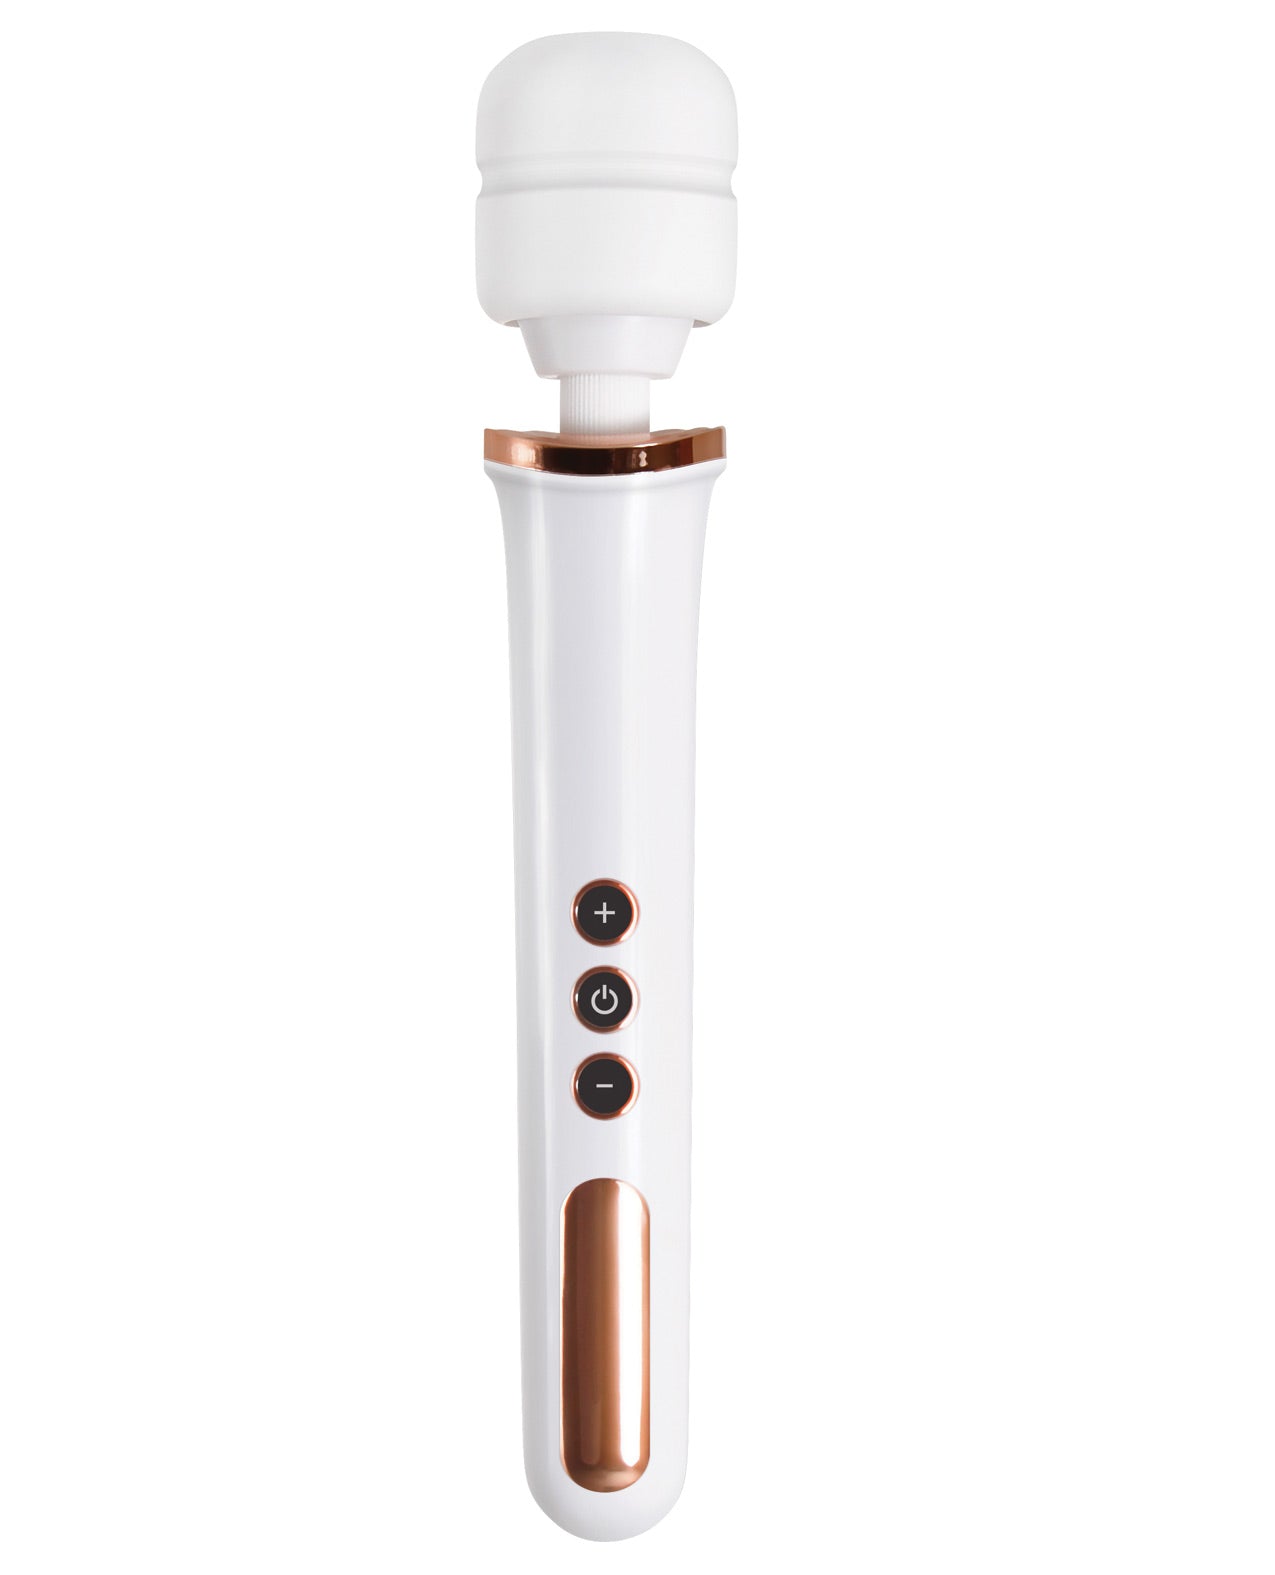 Adam & Eve Rechargeable Magic Massager - Rose Gold – Eve's Body Shop